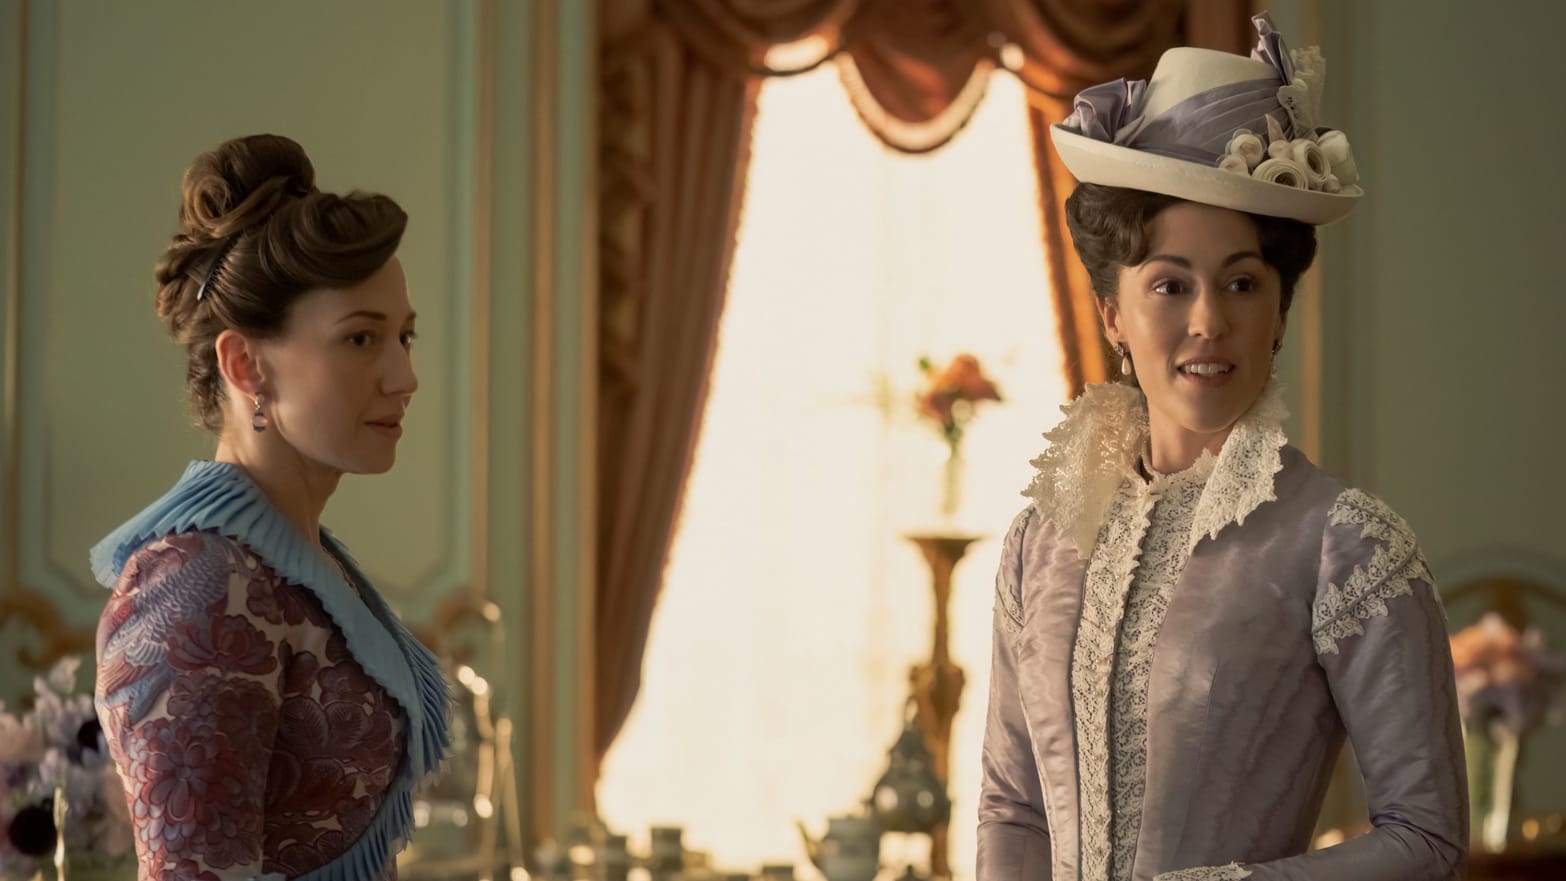 Carrie Coon and Kelley Curran next to each other in a still from 'The Gilded Age'